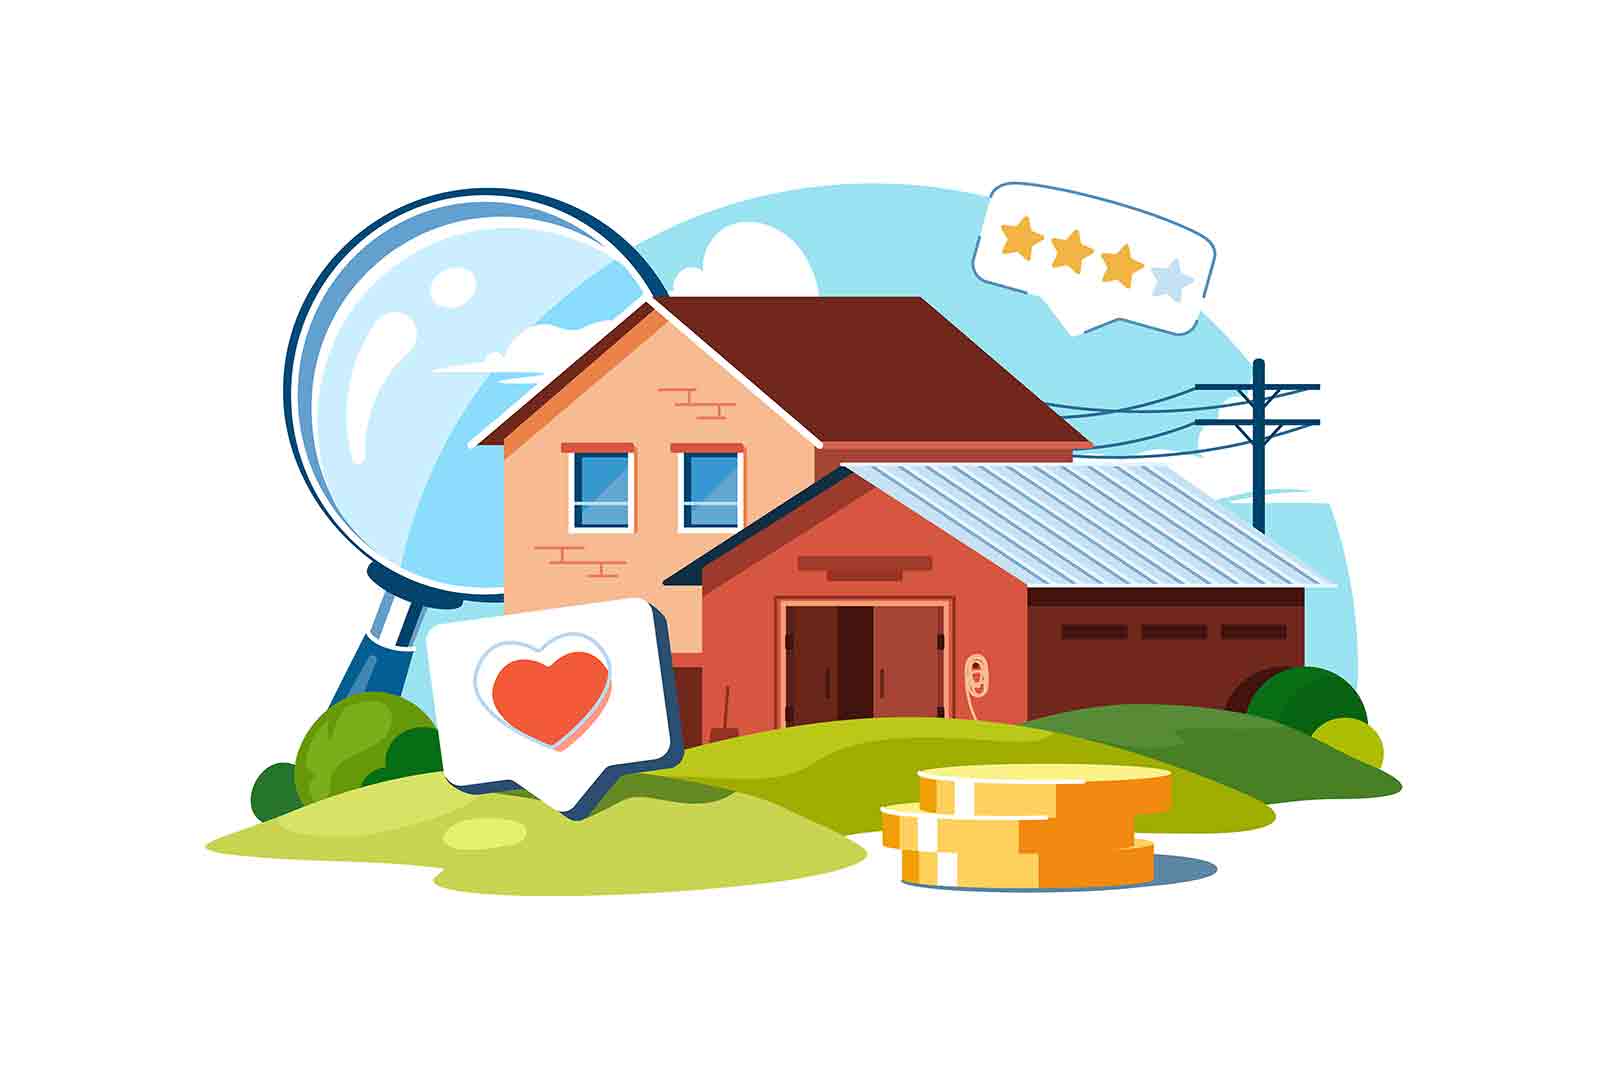 Real estate website with likes reviews and rating vector illustration. House, coins and magnifier flat concept. Rental or buying property online